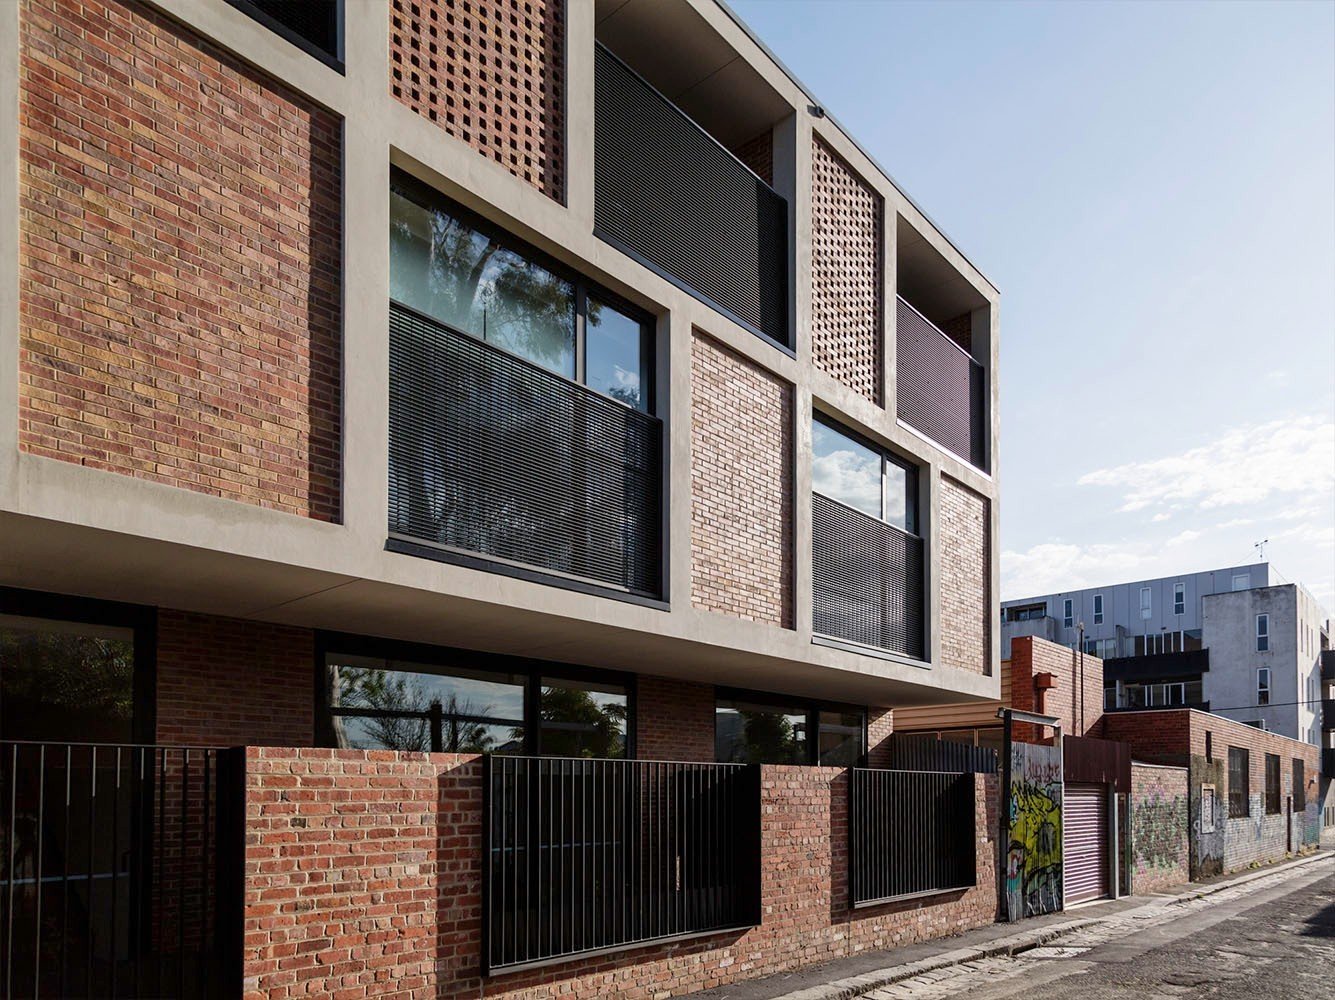 Positioned in the heart of Fitzroy, an area of working class roots now known for its artistic and cultural vibrancy, the C.F. Row townhouses perfectly balance contemporary design alongside the functional needs of it&rsquo;s dwellers. 

Brickwork and 